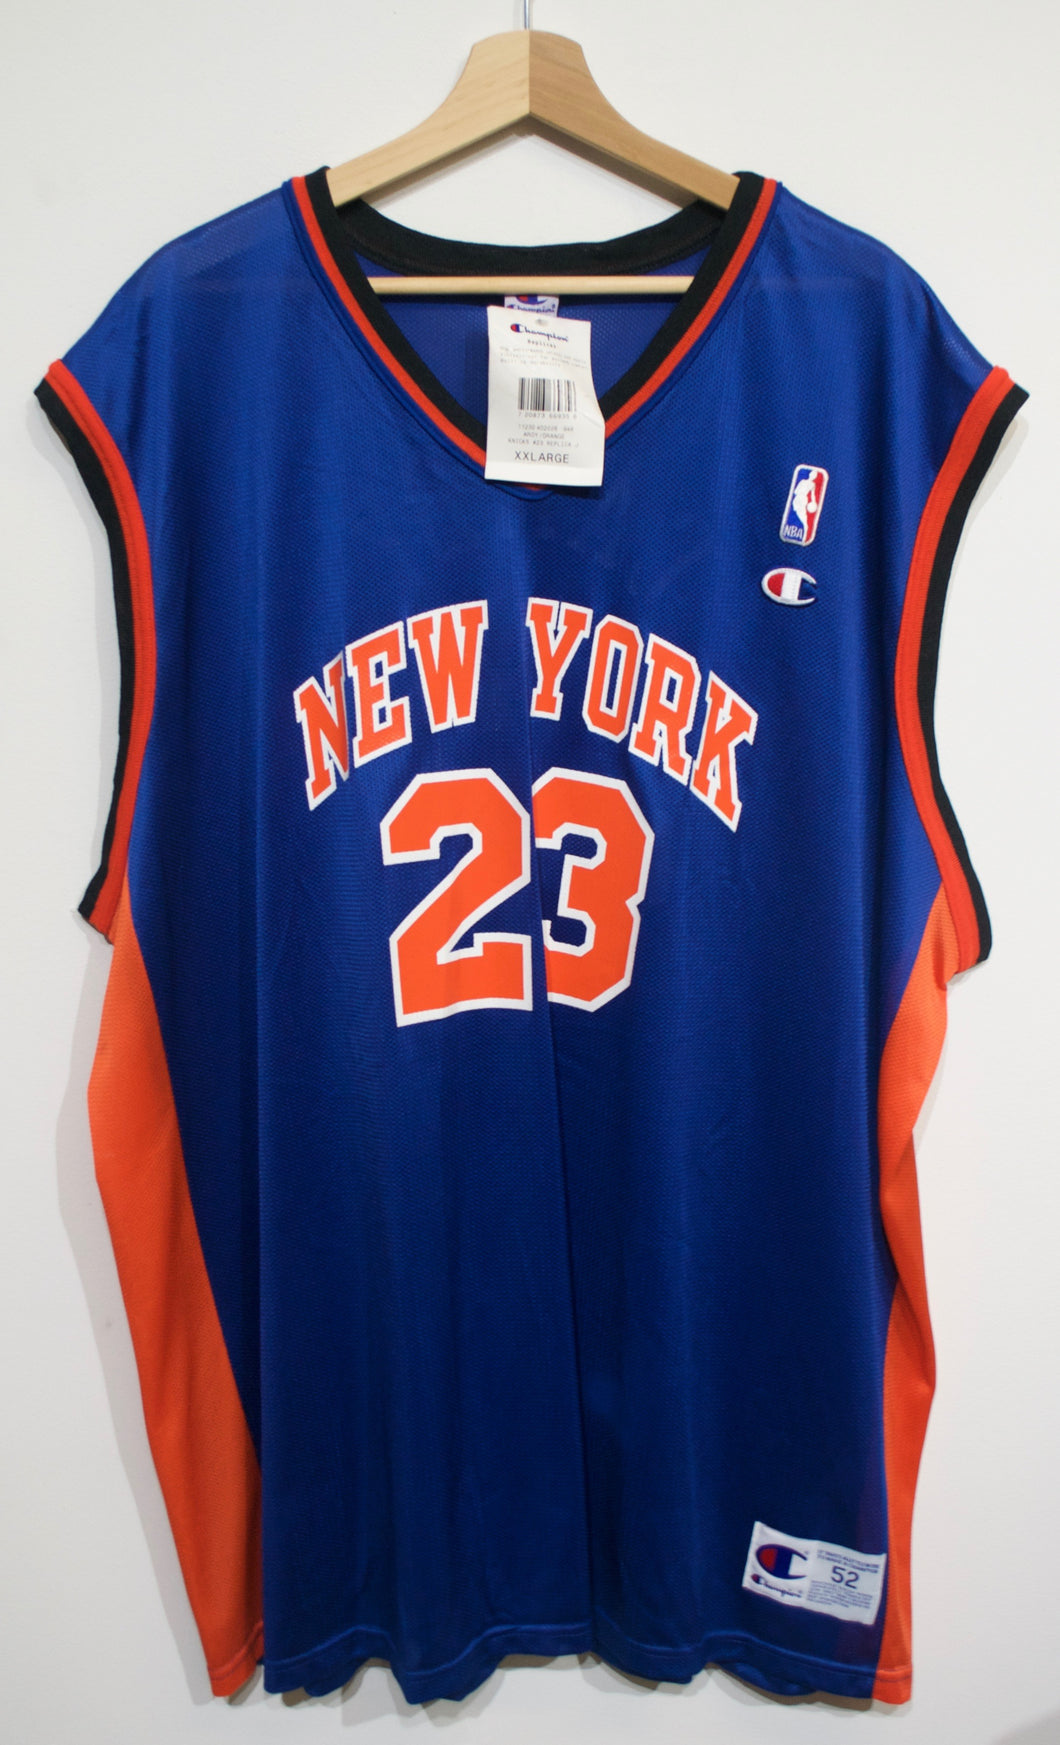 Marcus Camby New York Knicks Size 52 Jersey NWT